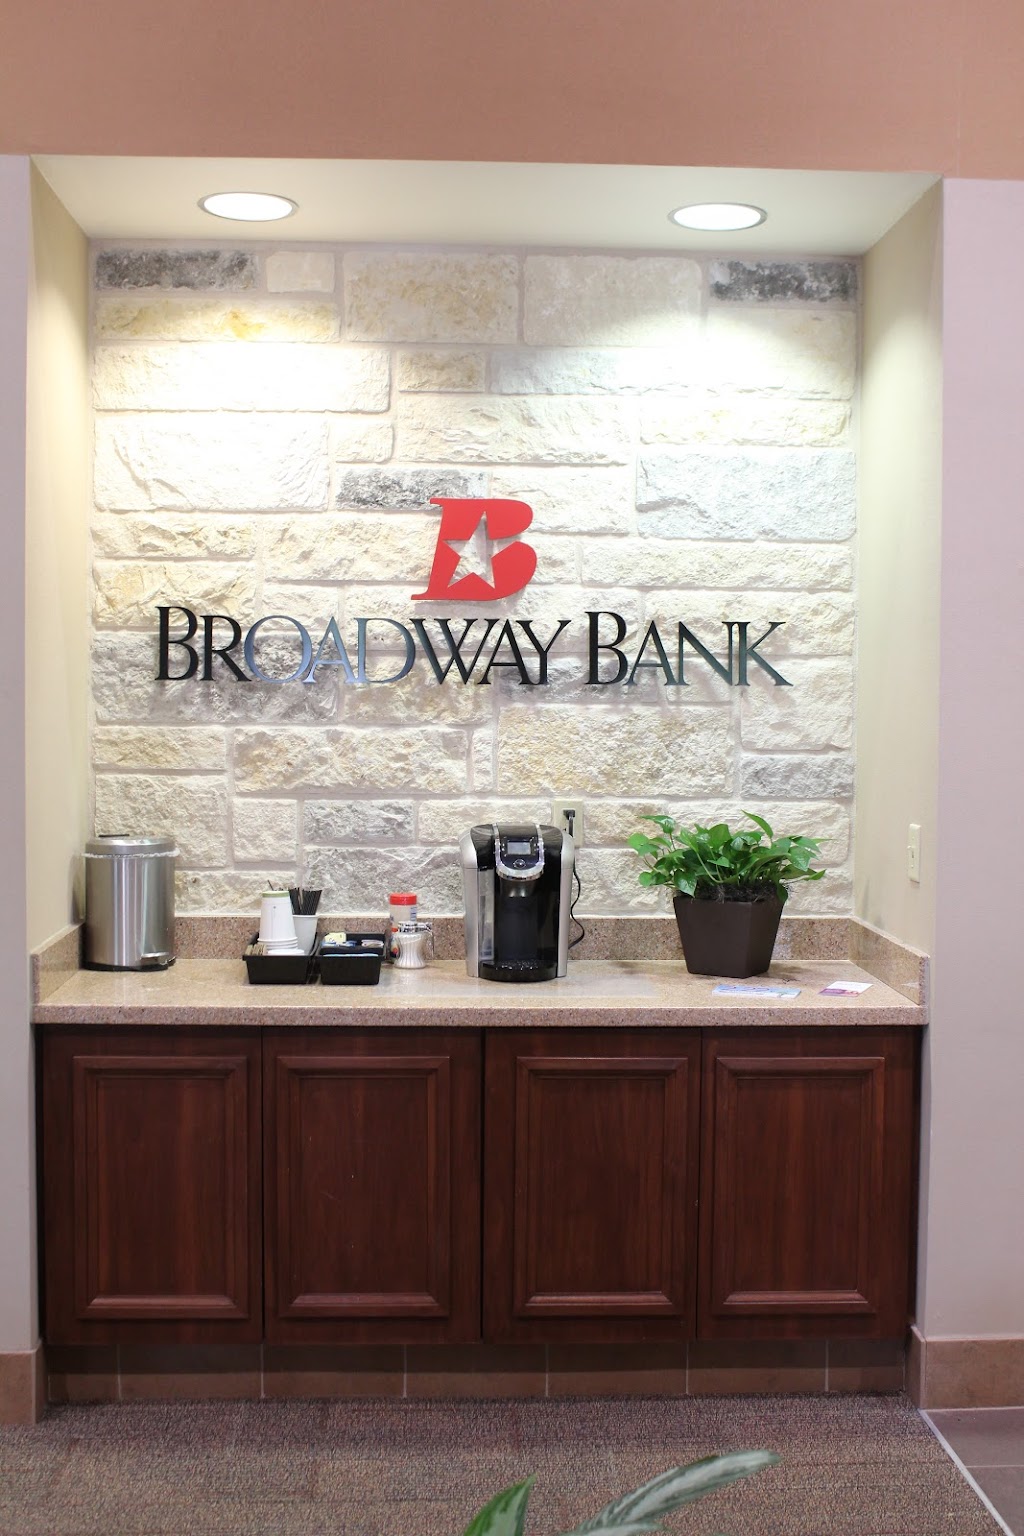 Broadway Bank - Bee Cave Financial Center | 12101 Bee Caves Rd building 3, Bee Cave, TX 78738 | Phone: (512) 465-6510